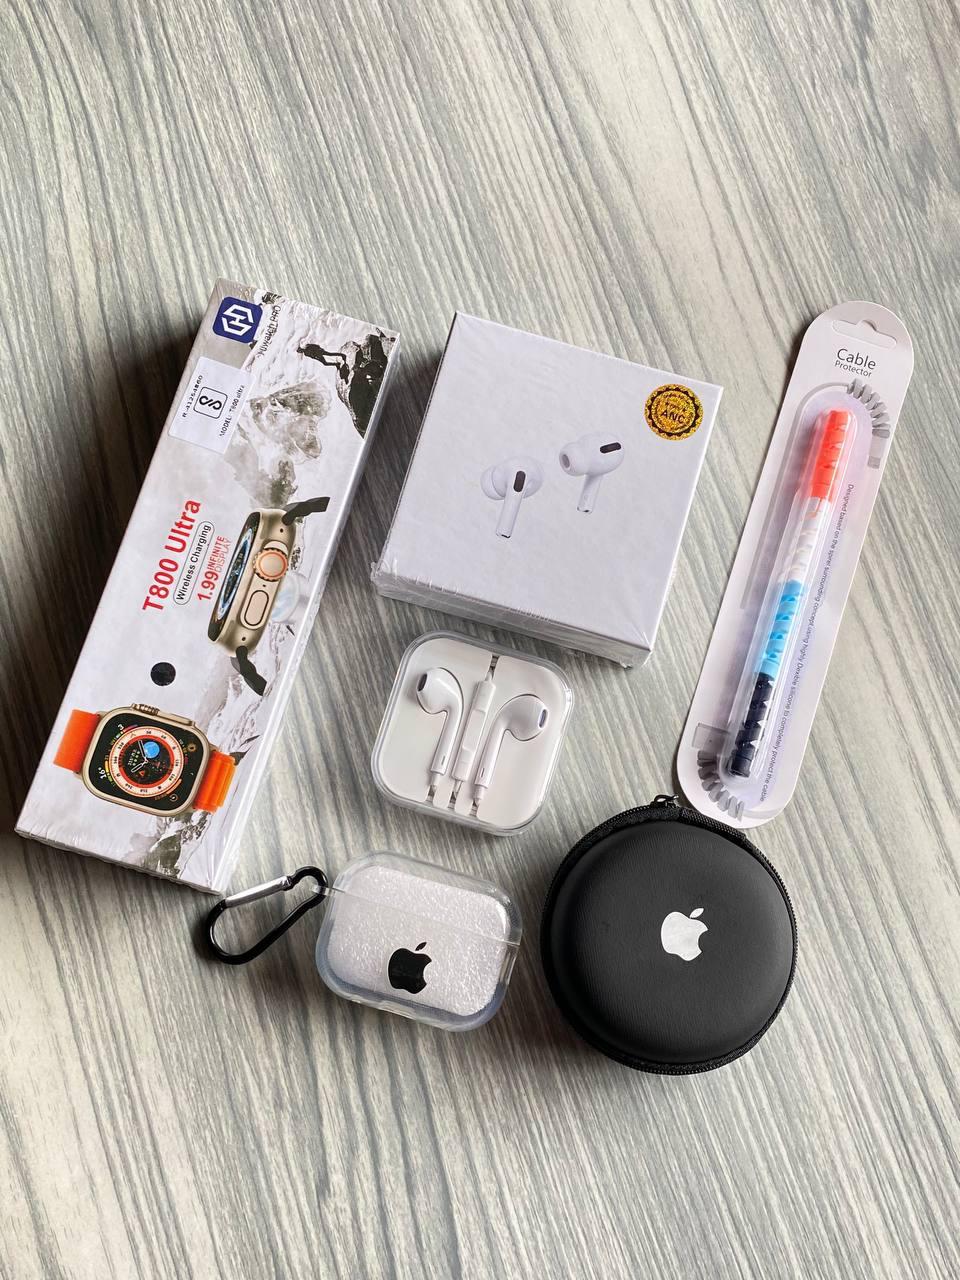 Ultra smartwatch combo with airpods pro 2 case and other packed all